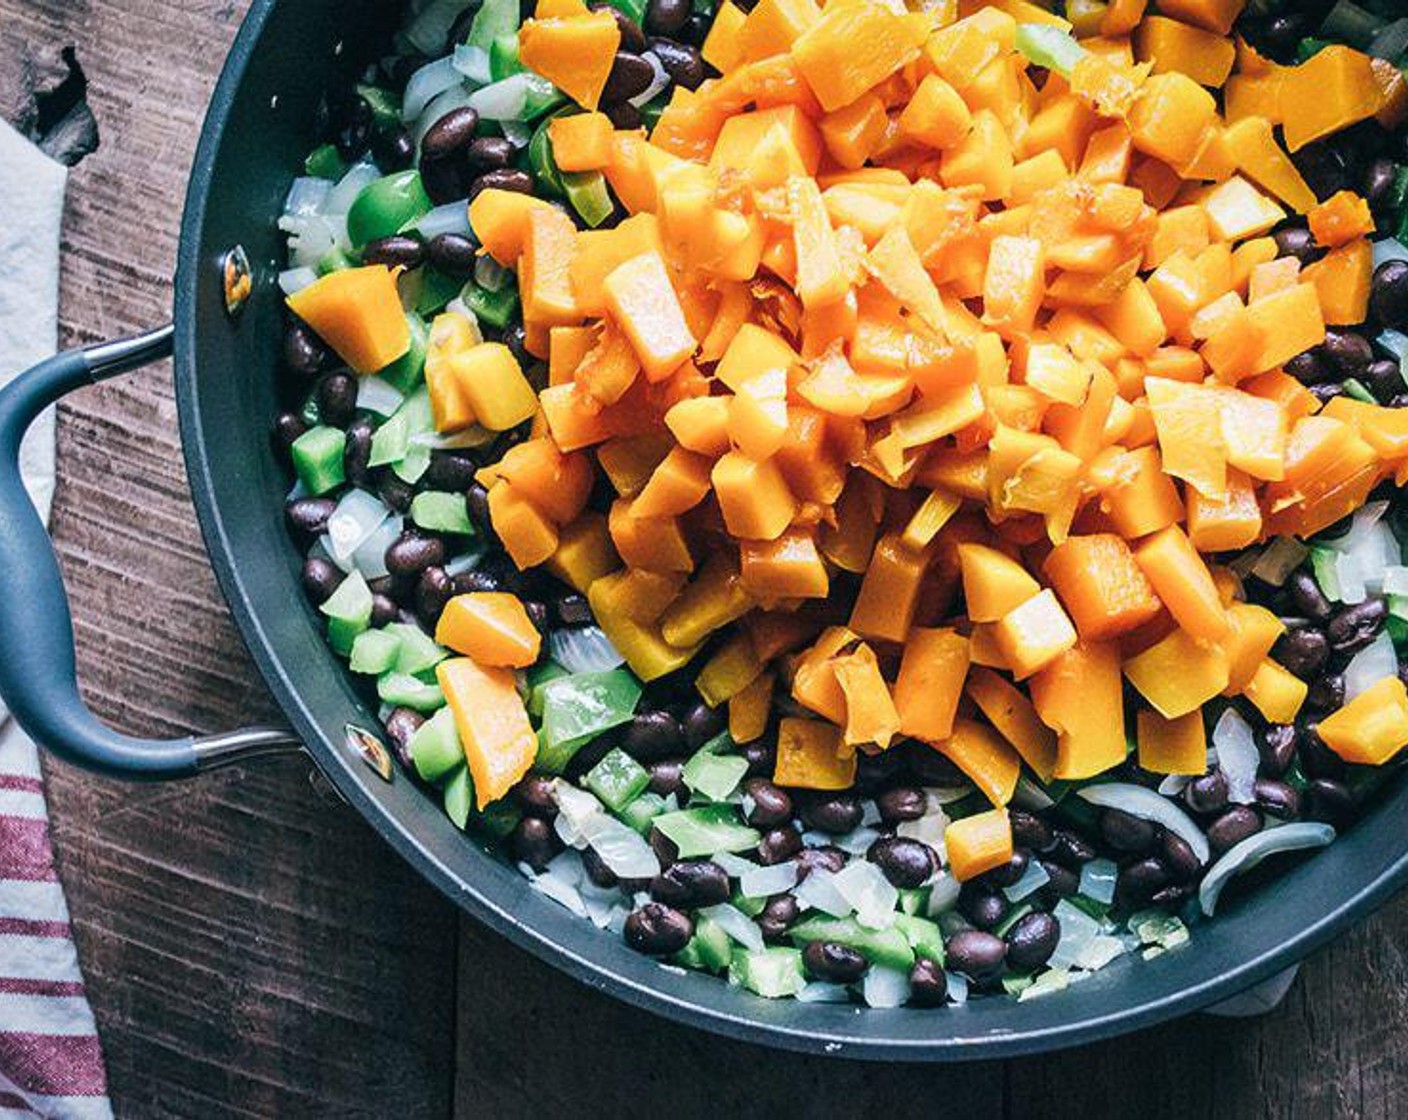 step 3 Meanwhile add Coconut Oil (1 Tbsp), Onion (1), Green Bell Pepper (1), Garlic (2 cloves) to large sauce pan, and cook over medium heat for 5-7 minutes or until onions are translucent, add in Canned Black Beans (2 1/3 cups) and cooked butternut squash, stir to combine.